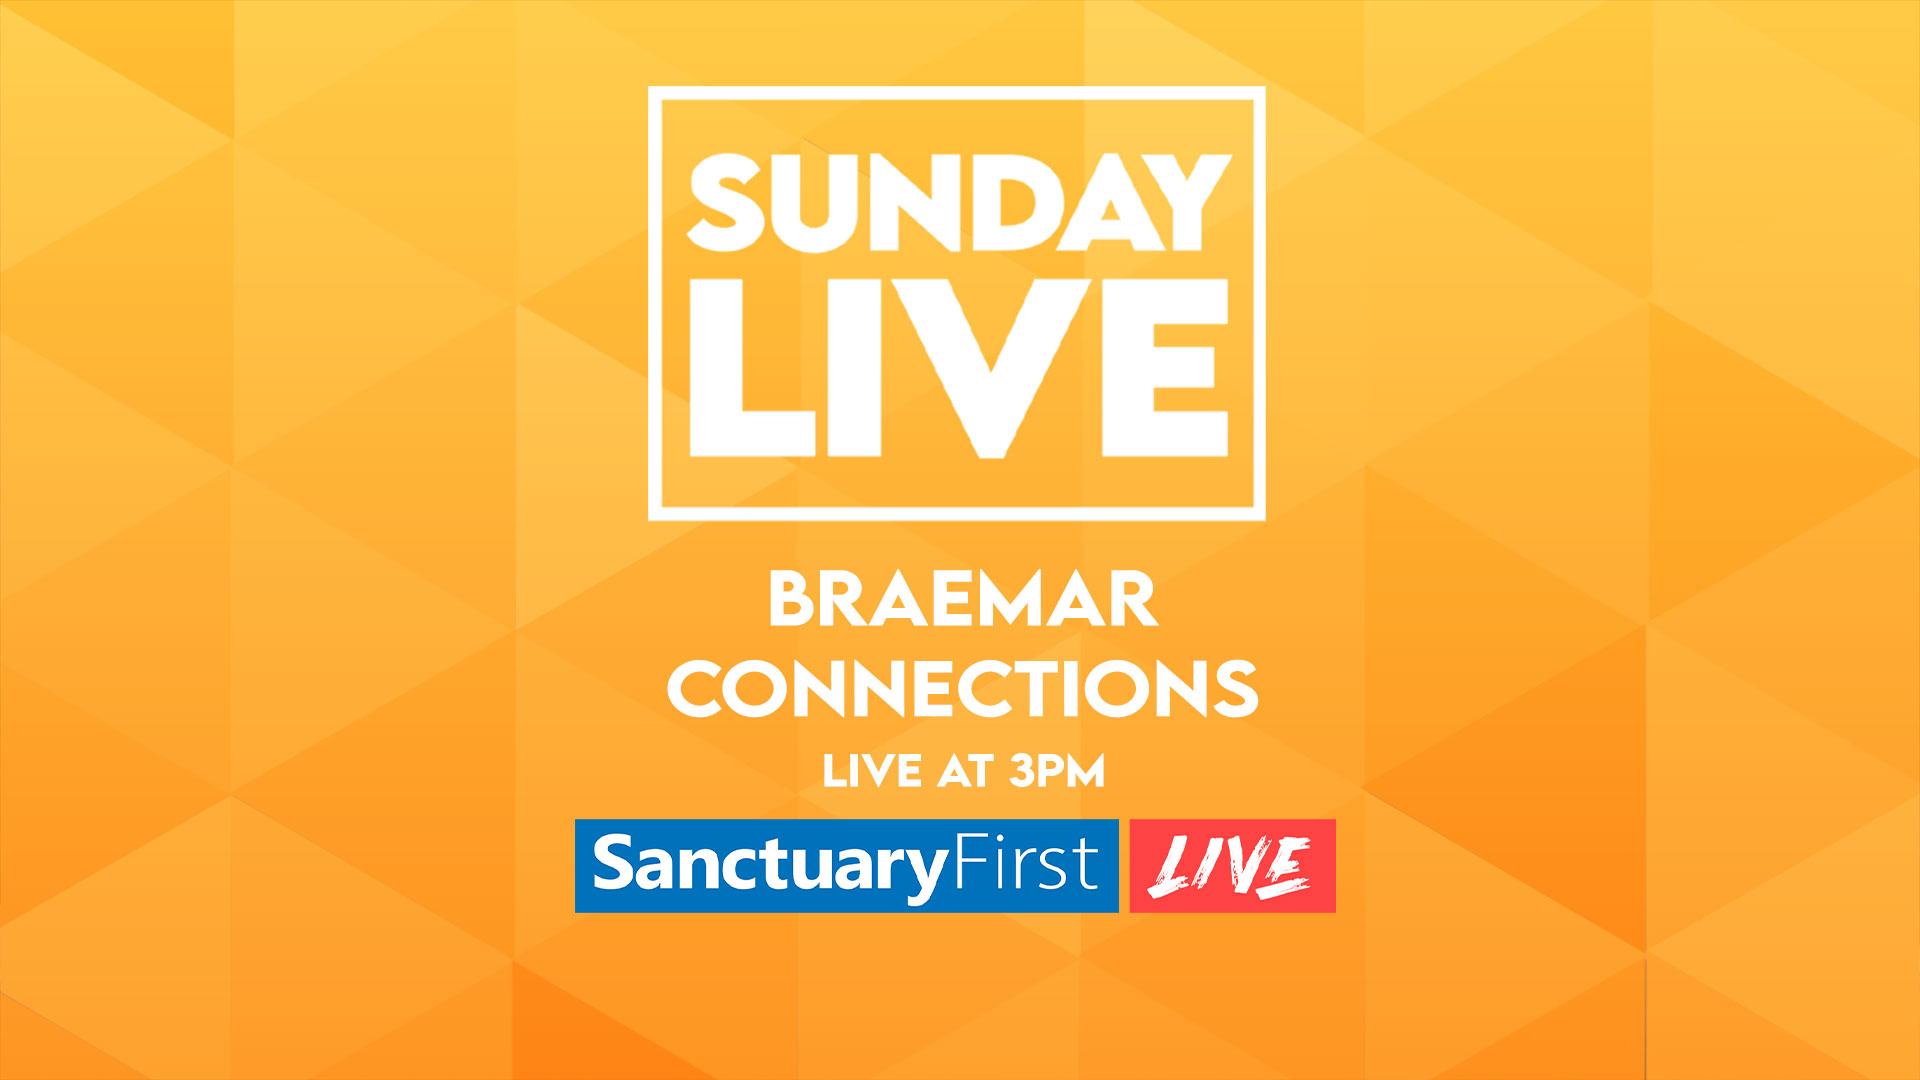 Sunday Live - Braemar Connections